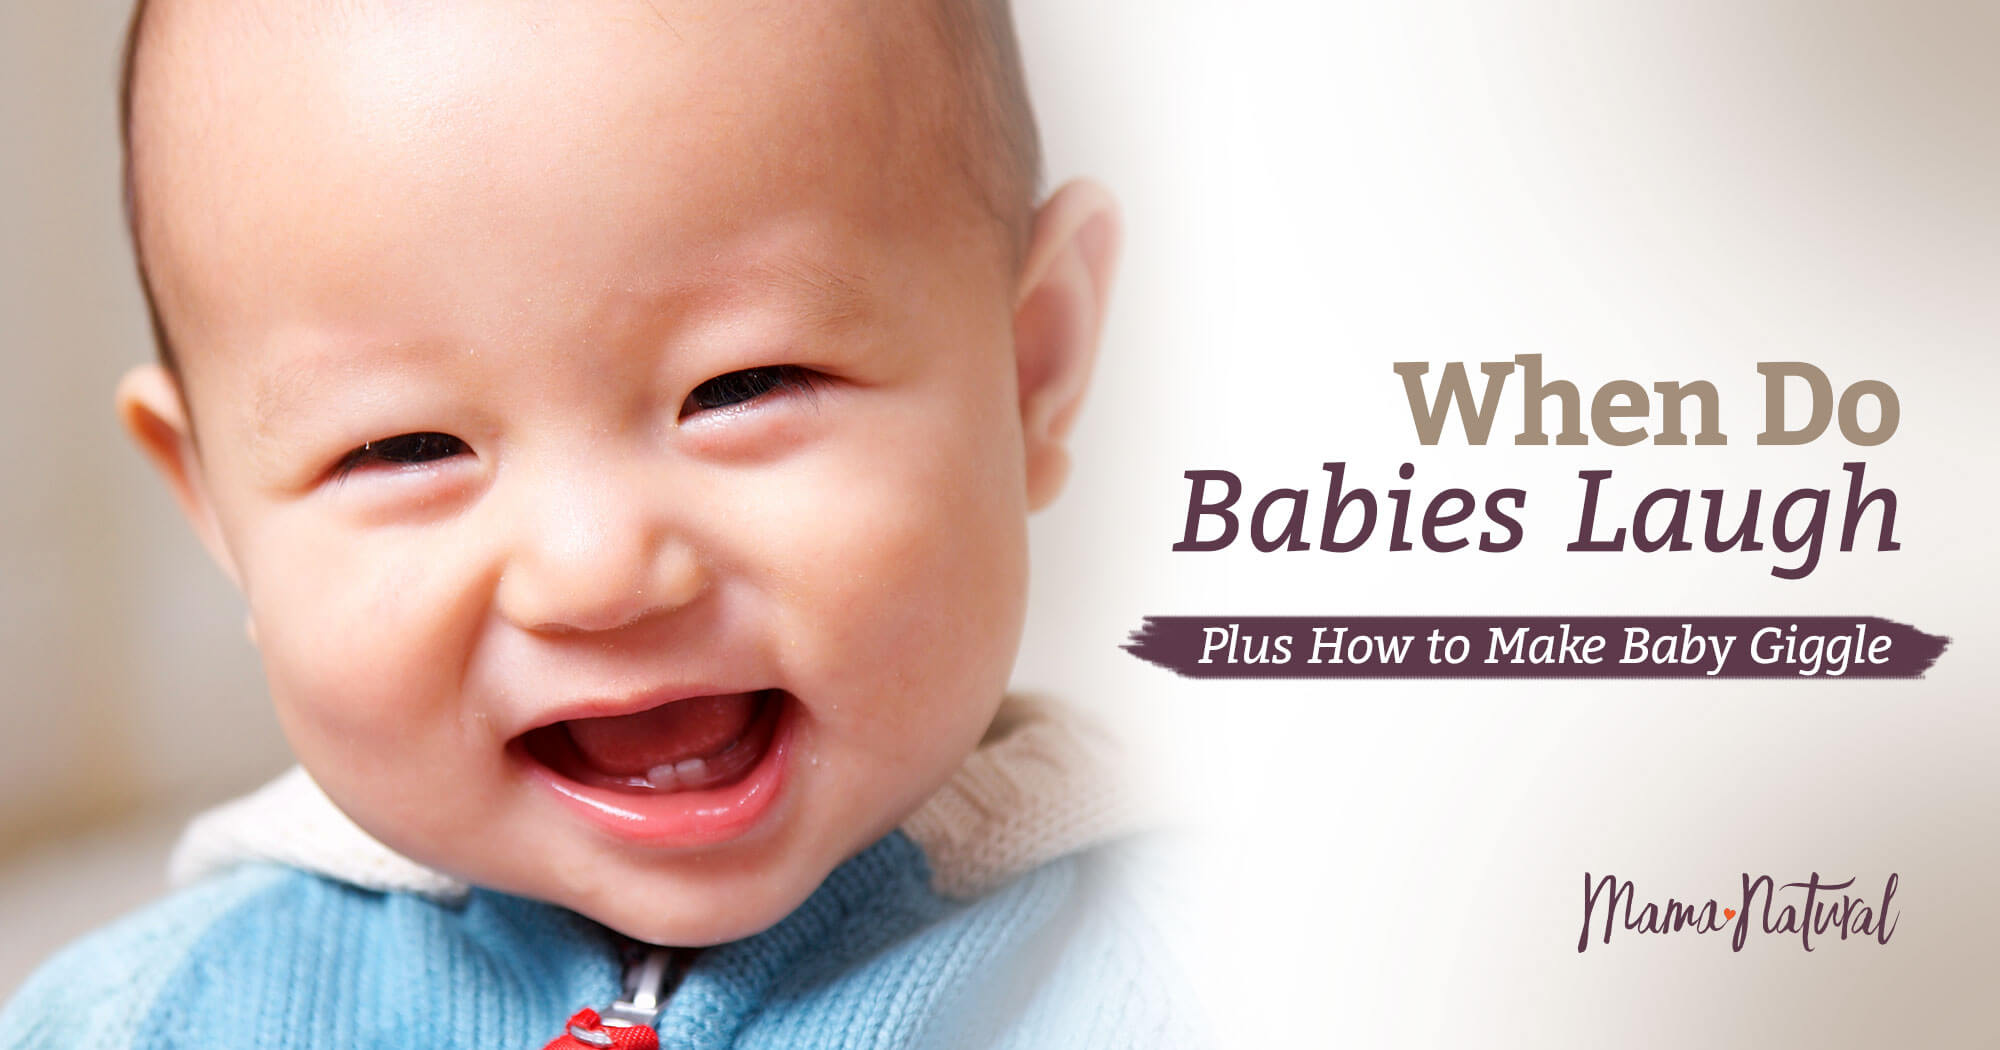 When Do Babies Laugh? Plus, How to Make Baby Giggle